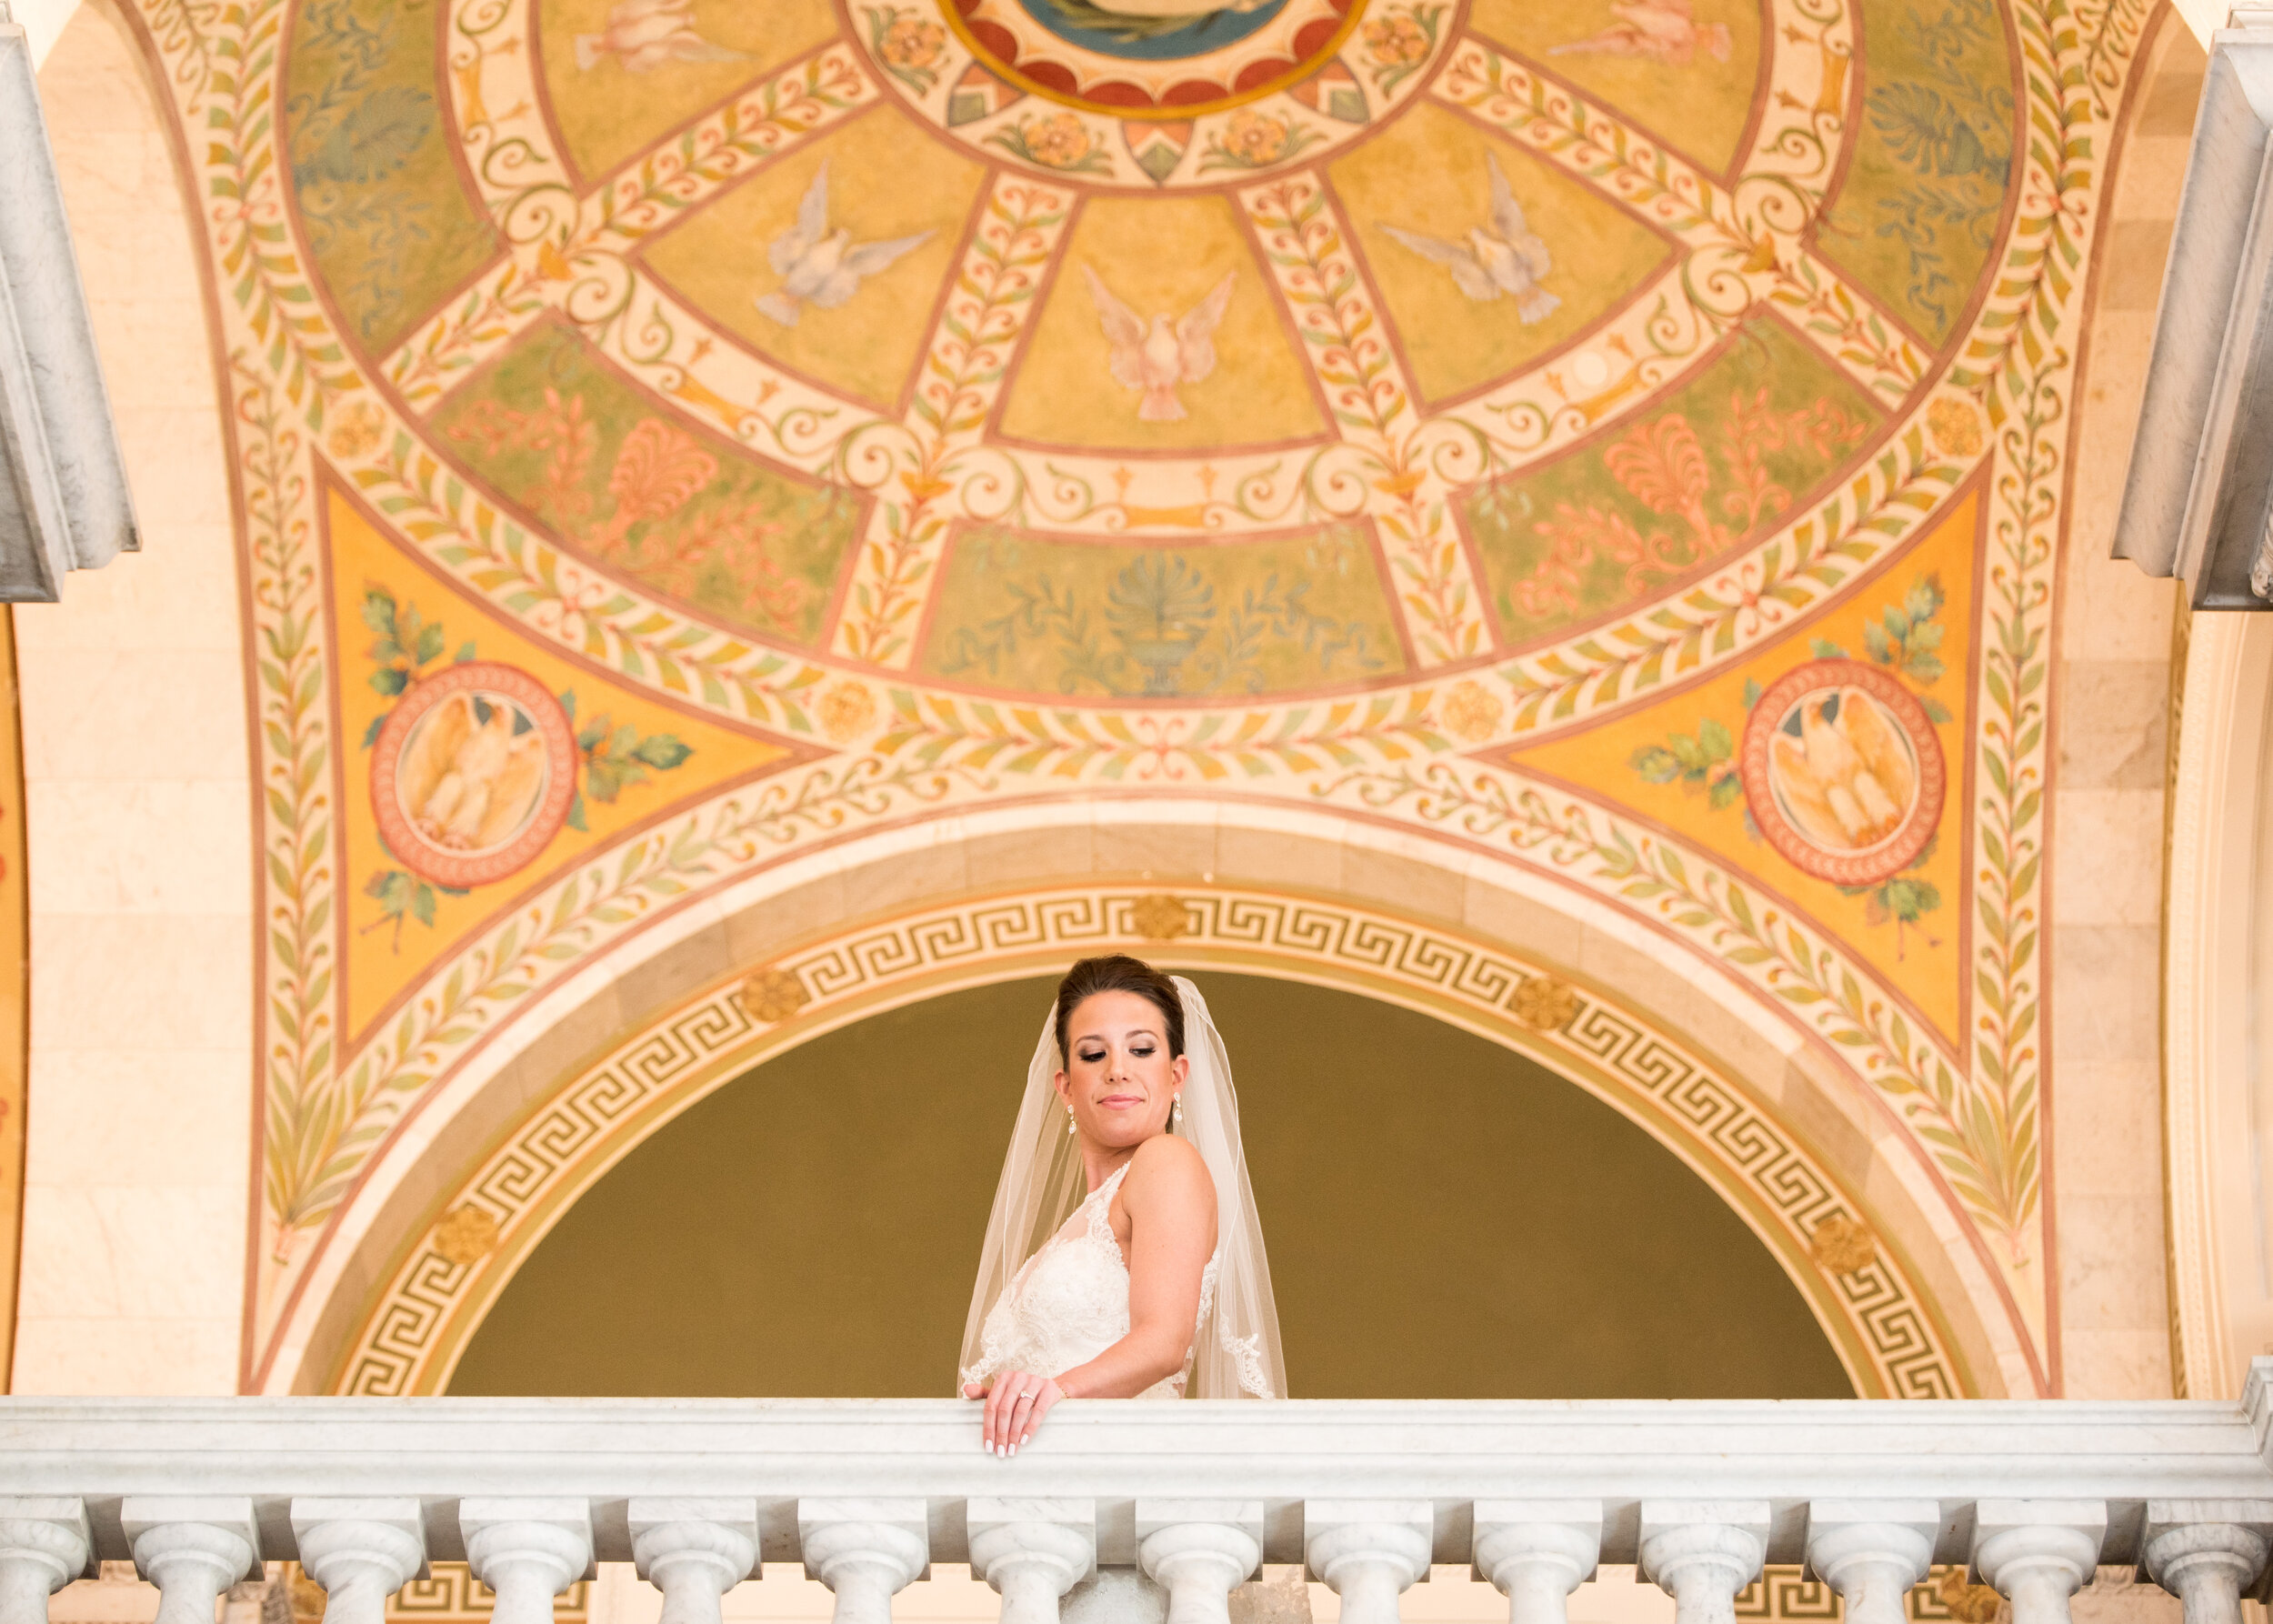 Photos from the Harty | Top Rated Professional Wedding, Event, and Lifestyle Photography in Washington, DC